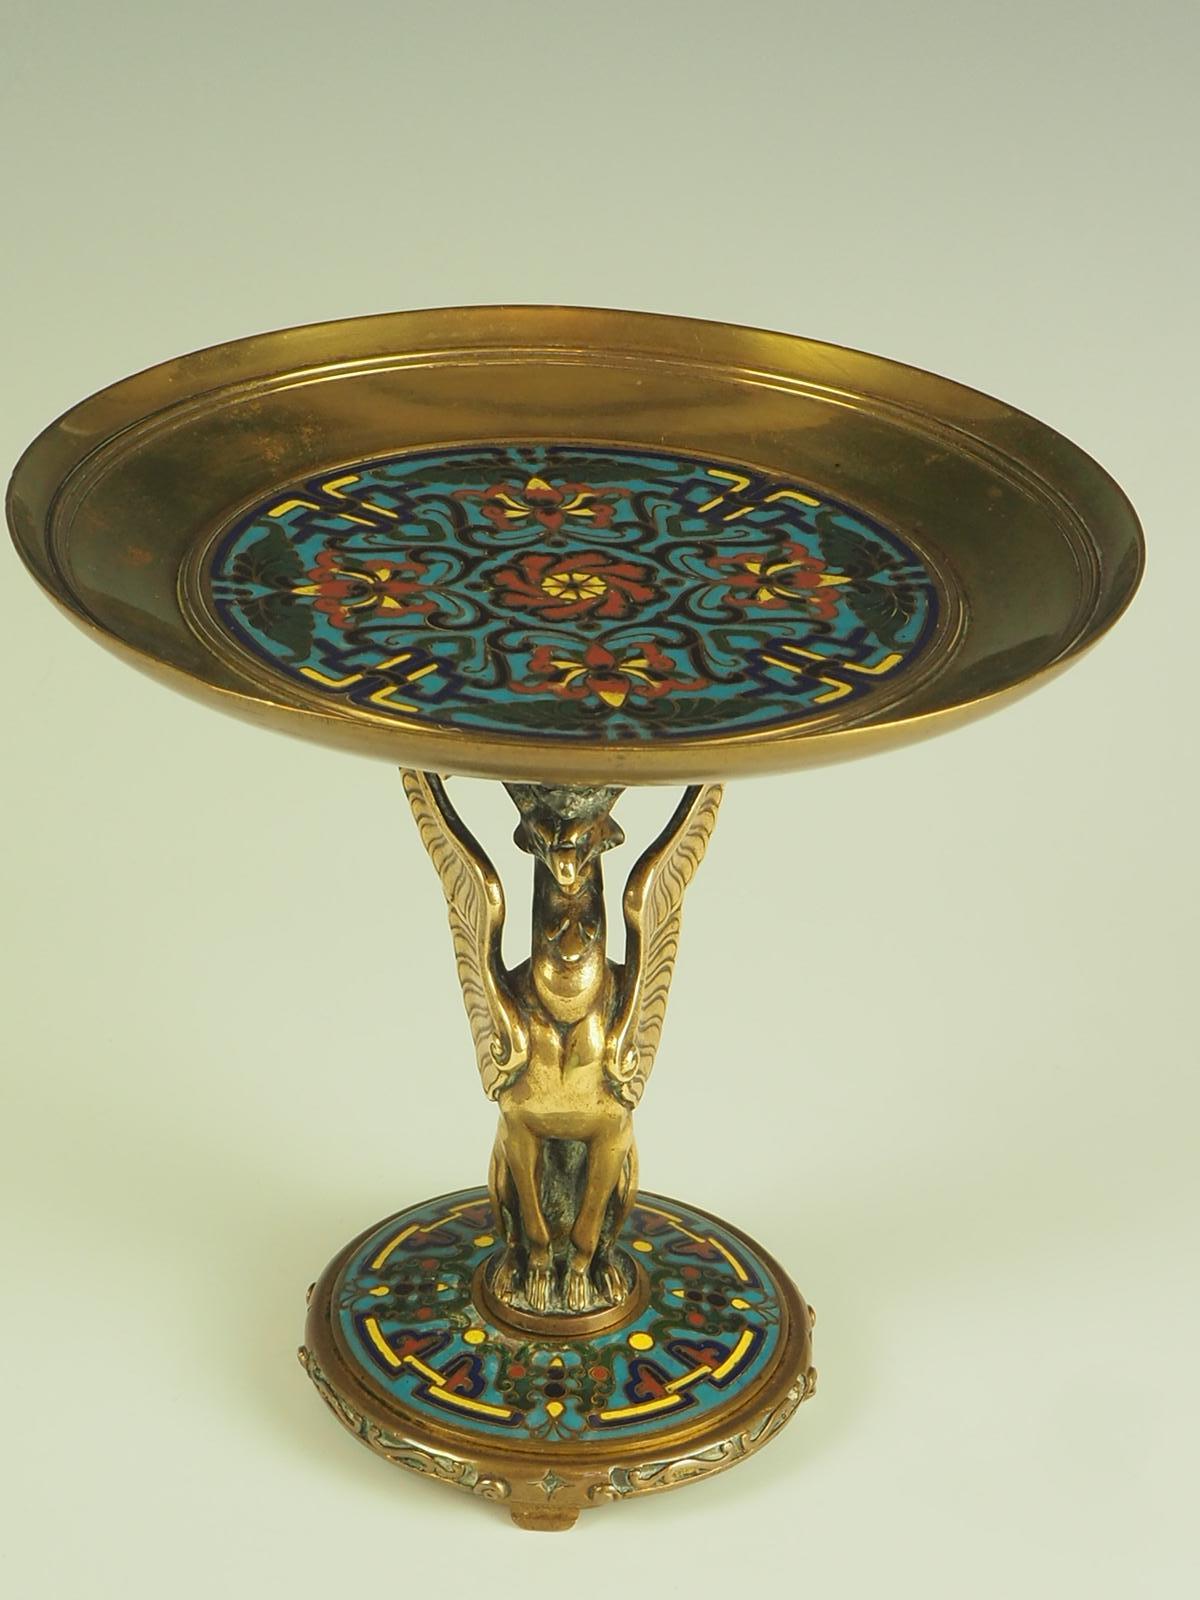 19th Century Ferdinand Barbedienne Gilt Bronze and Cloisonné Enamel Tazza Dish For Sale 2